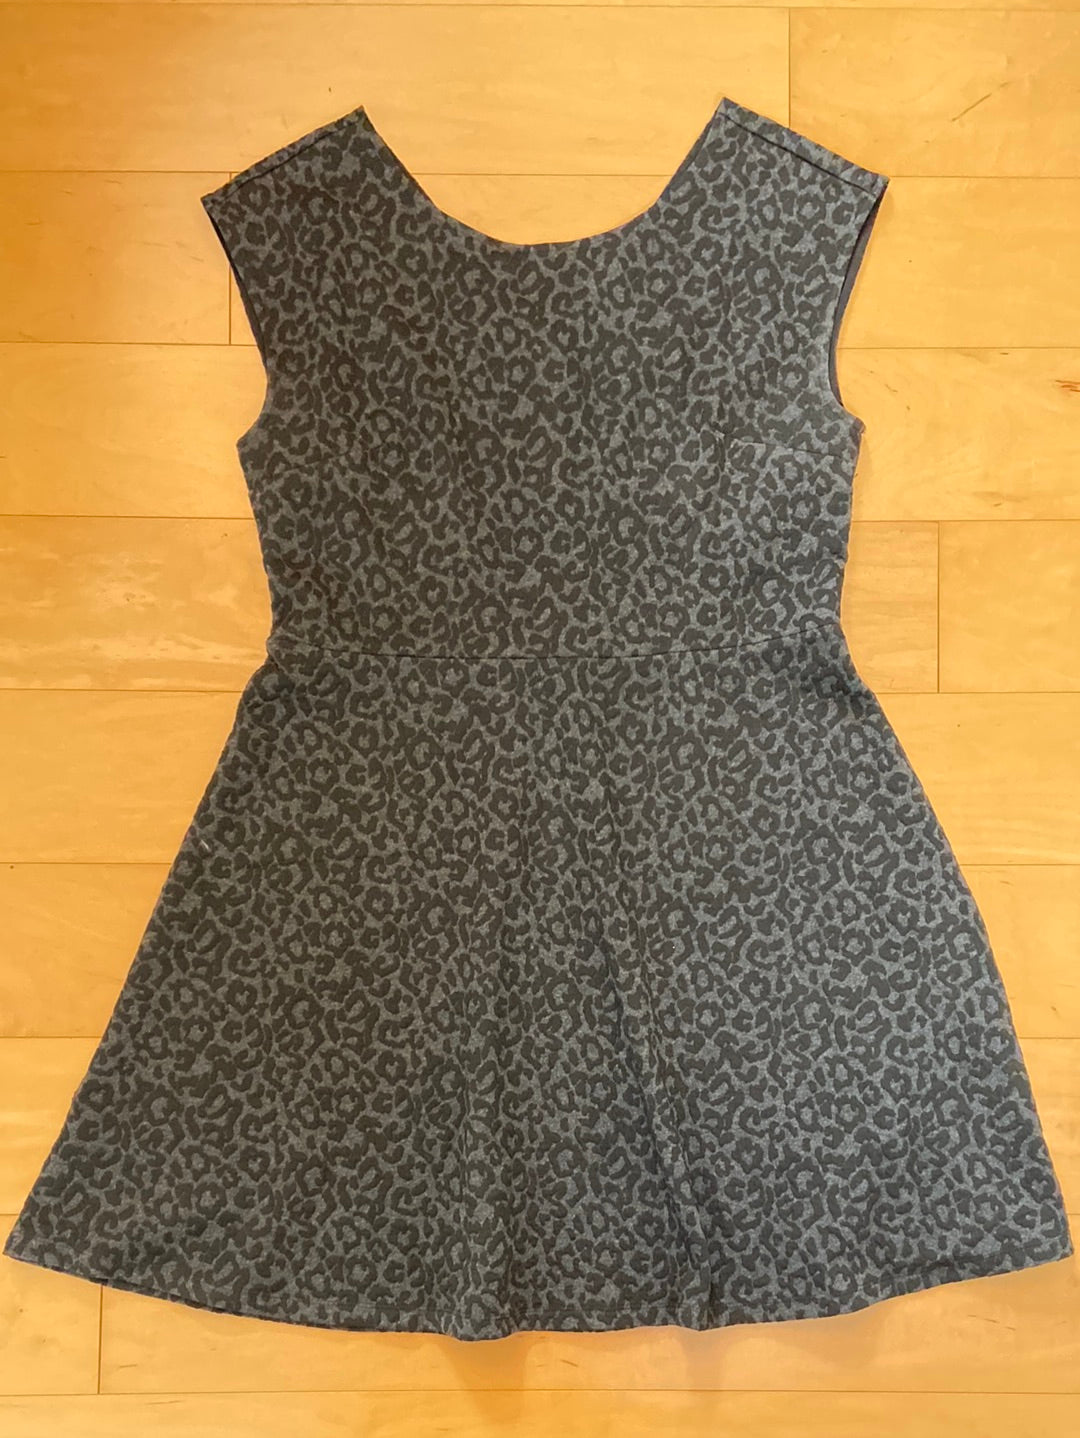 Gray and black animal print sleeveless dress fit and flare style knee length